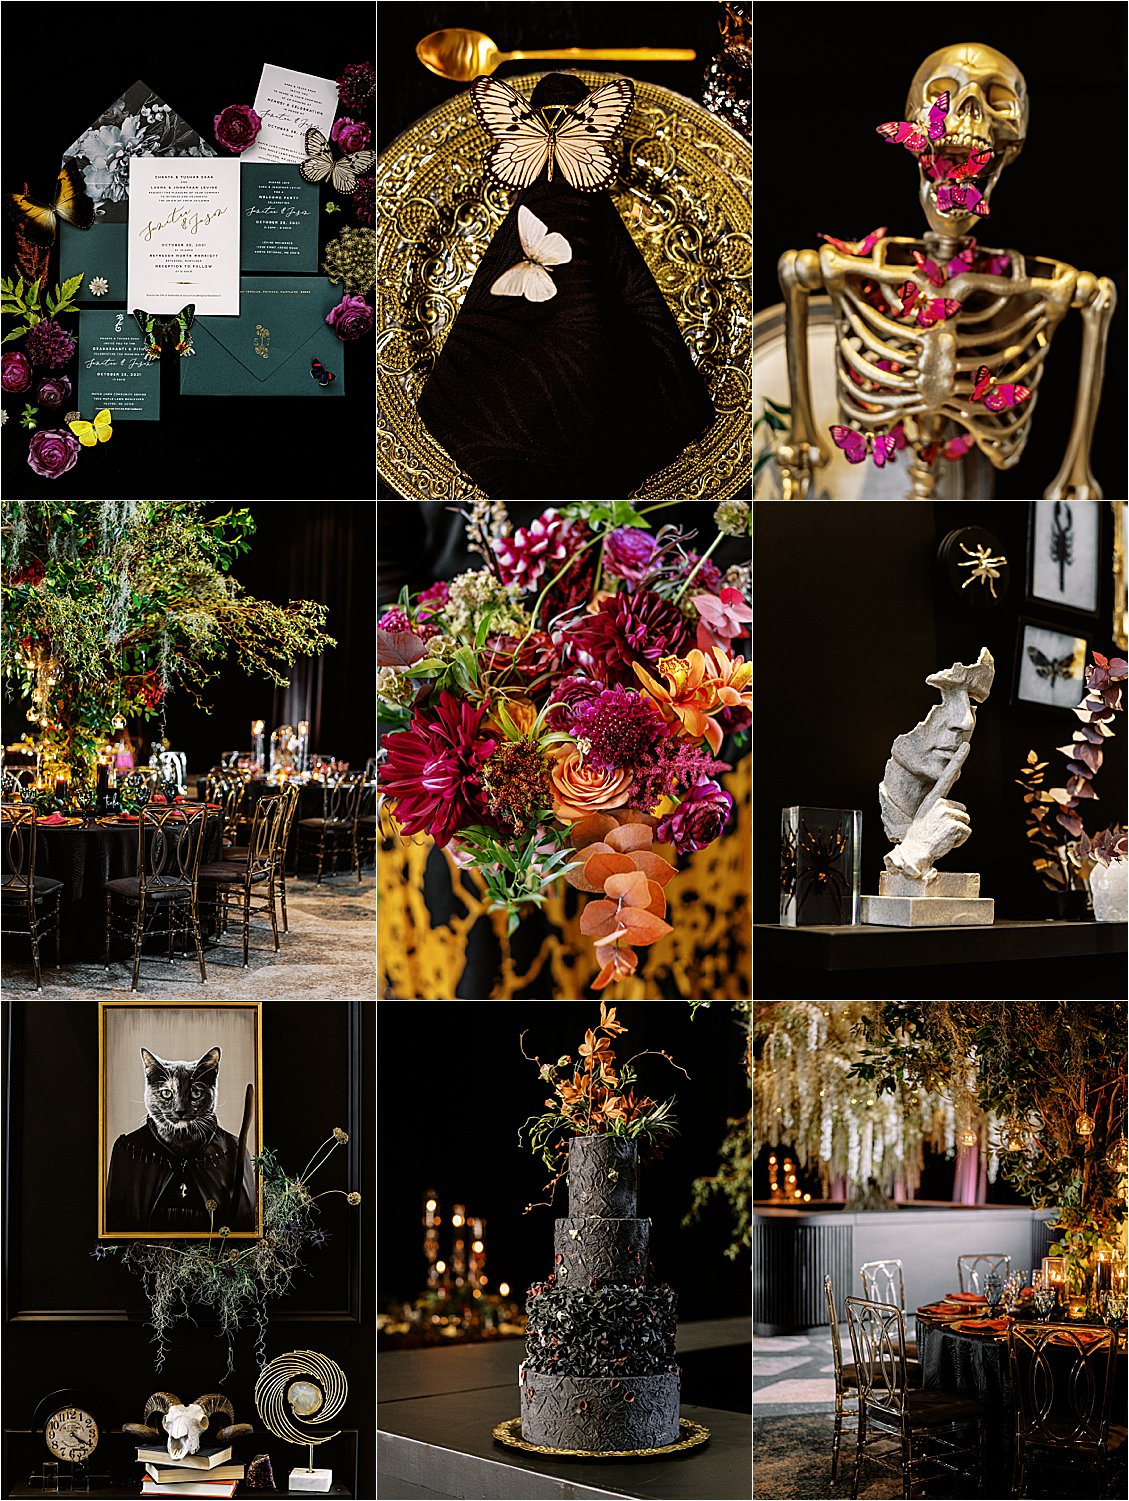 Luxury Gothic Halloween Wedding in Bethesda, Maryland with DC + Destination Film Wedding Photographer, Renee Hollingshead. Planning by Ida Rose Events with Sweet Root Village, Social Supply Co, Something Vintage Rentals, Jess McSweeney, Jisoo Cakes, and more at Bethesda North Marriott in Rockville, Maryland.